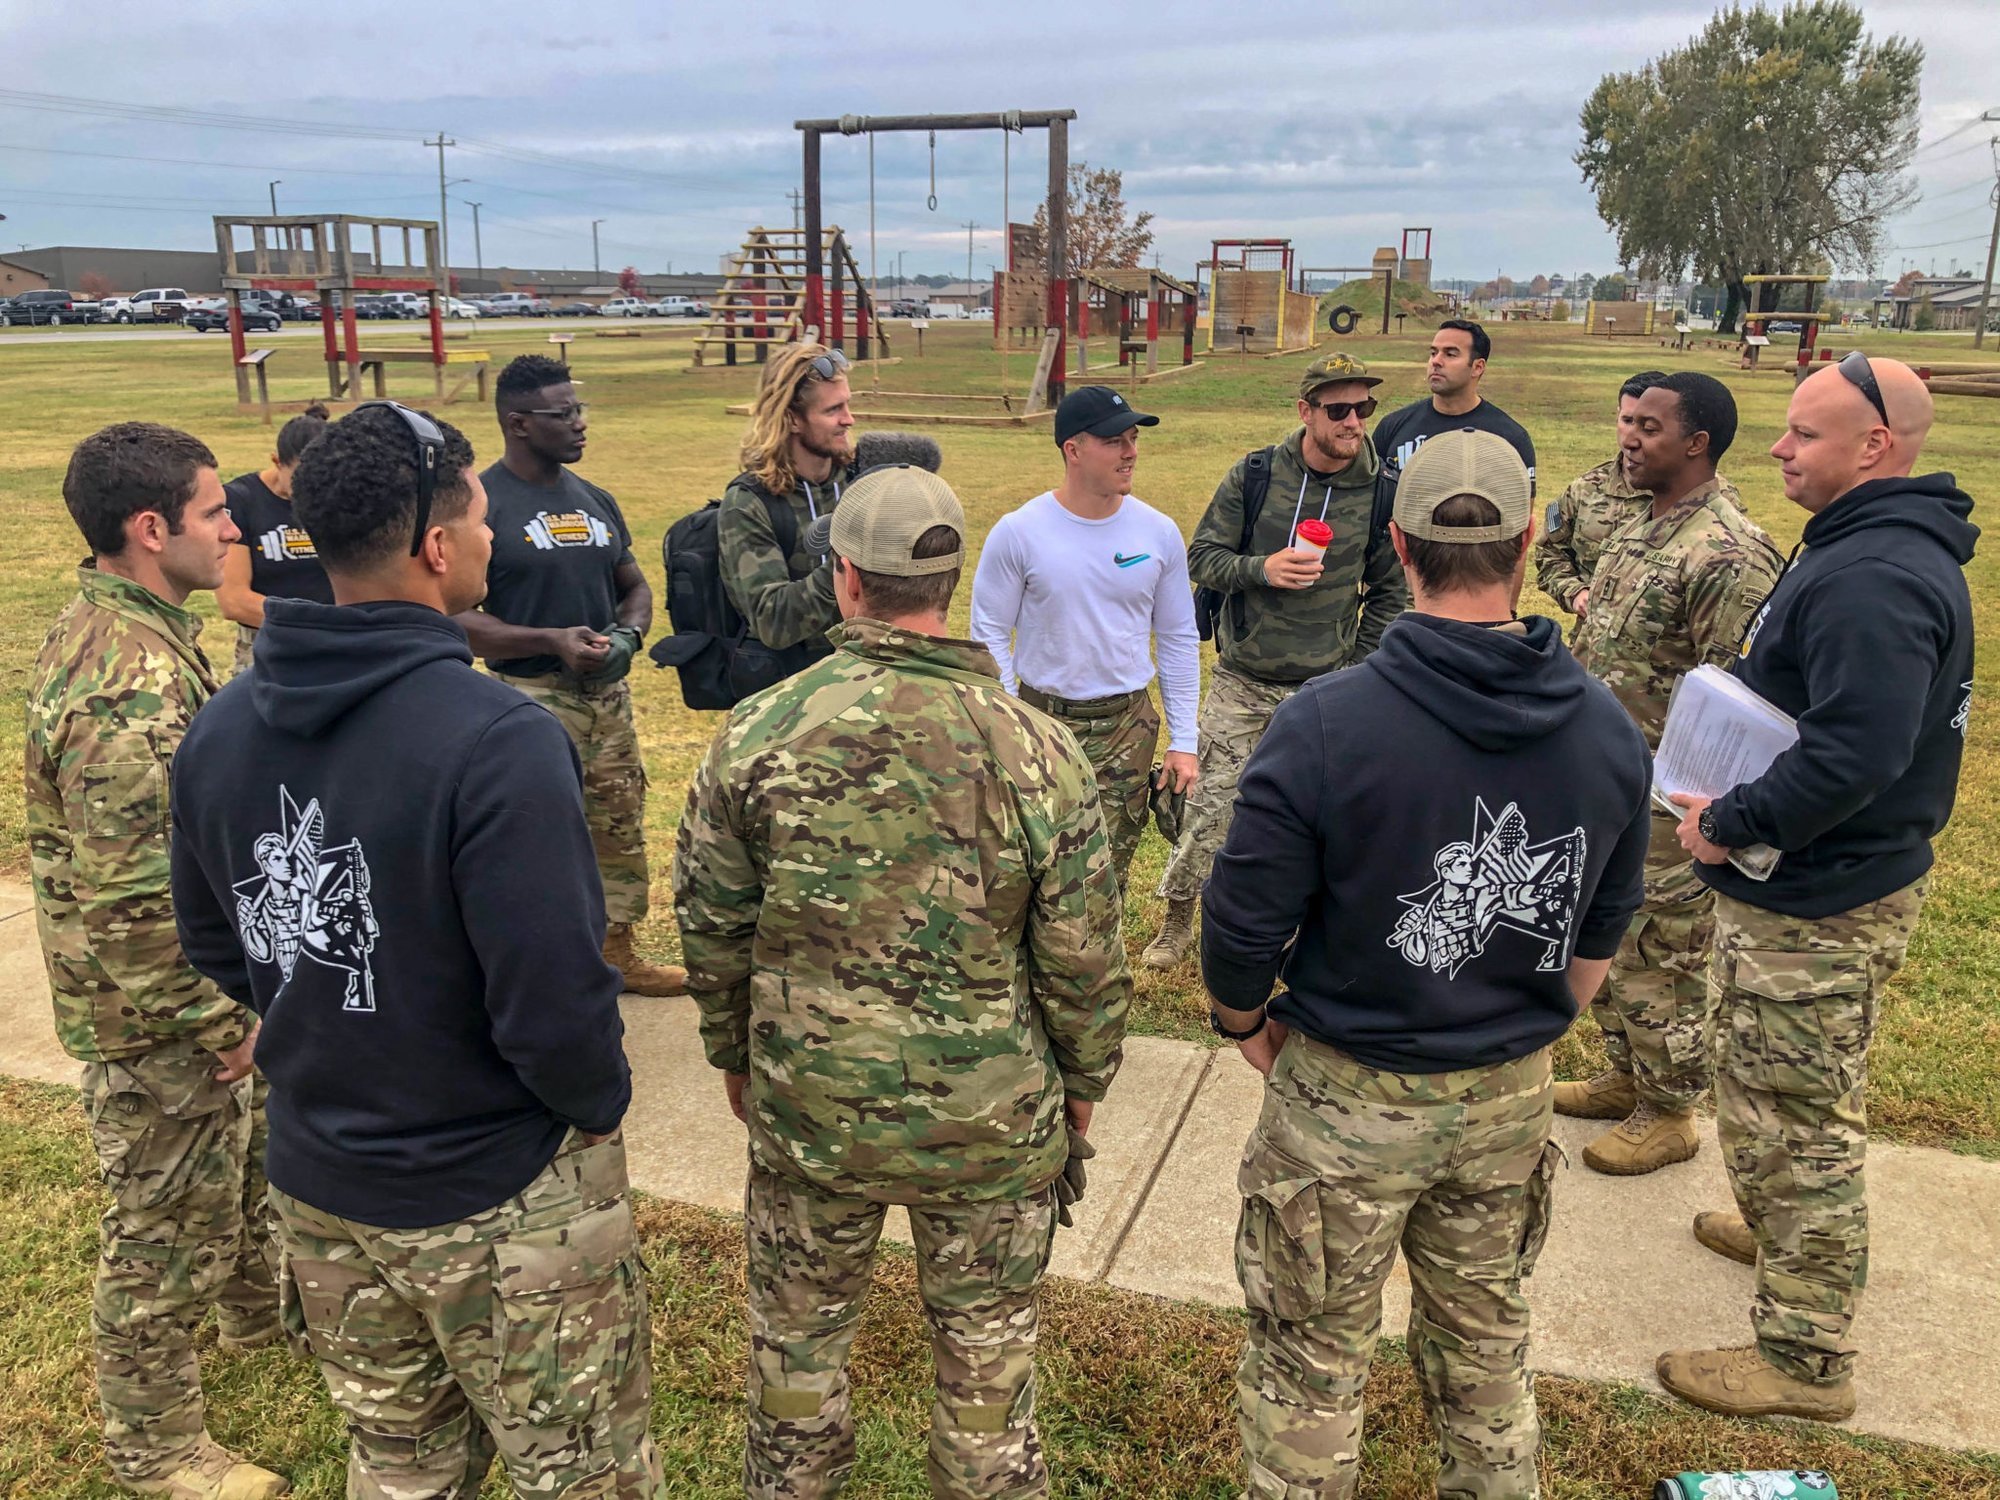 Professional CrossFit athlete Noah Ohlsen, along with members of the U.S. Army Warrior Fitness Team, meet with 5th Special Forces Group (Airborne) soldiers at Fort Campbell, Ky., Oct. 25 2019. Green Berets held multiple events throughout the day to show the physical fitness aspect of a special operations unit.